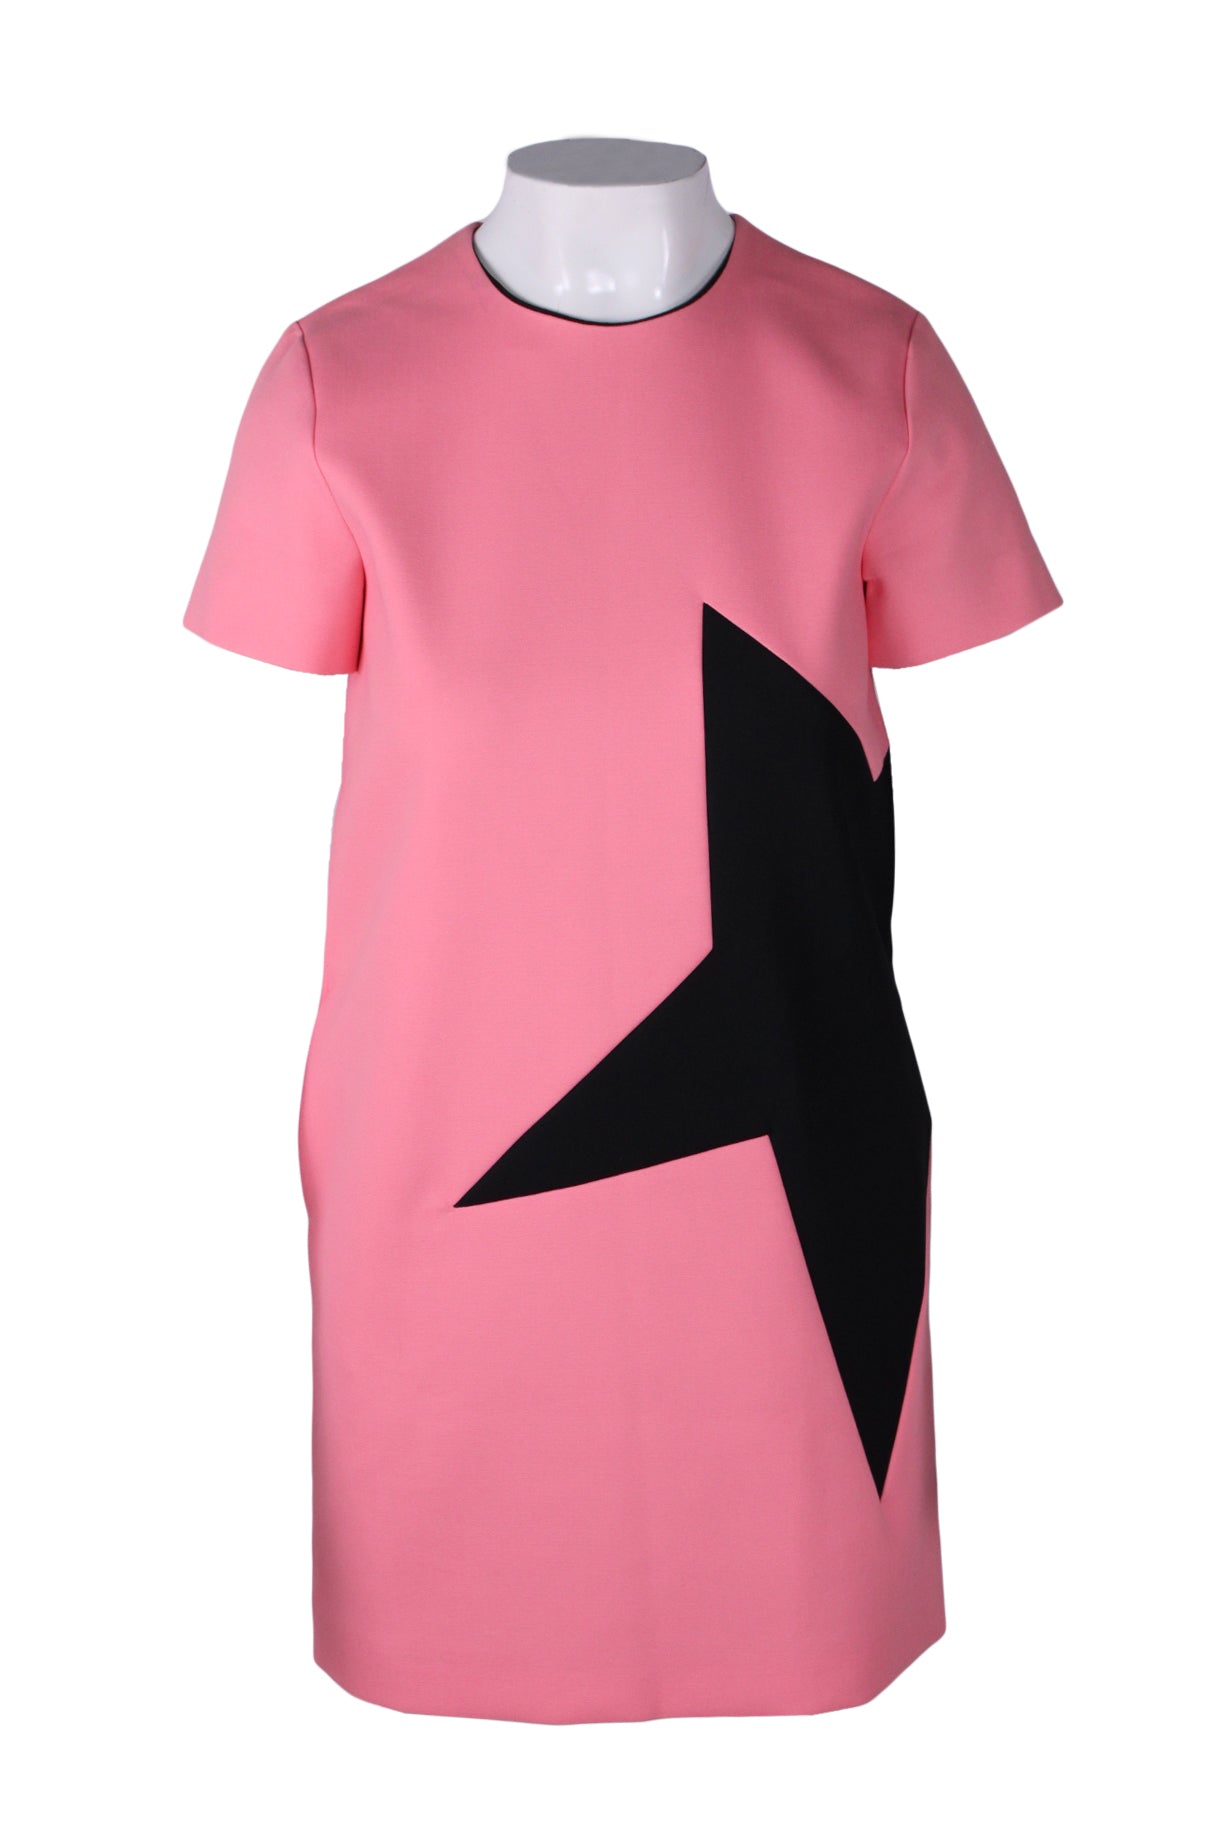 front of  msgm pink short sleeve dress. features crew neckline, maxi star detail at left side, side seam pockets, and straight fit.